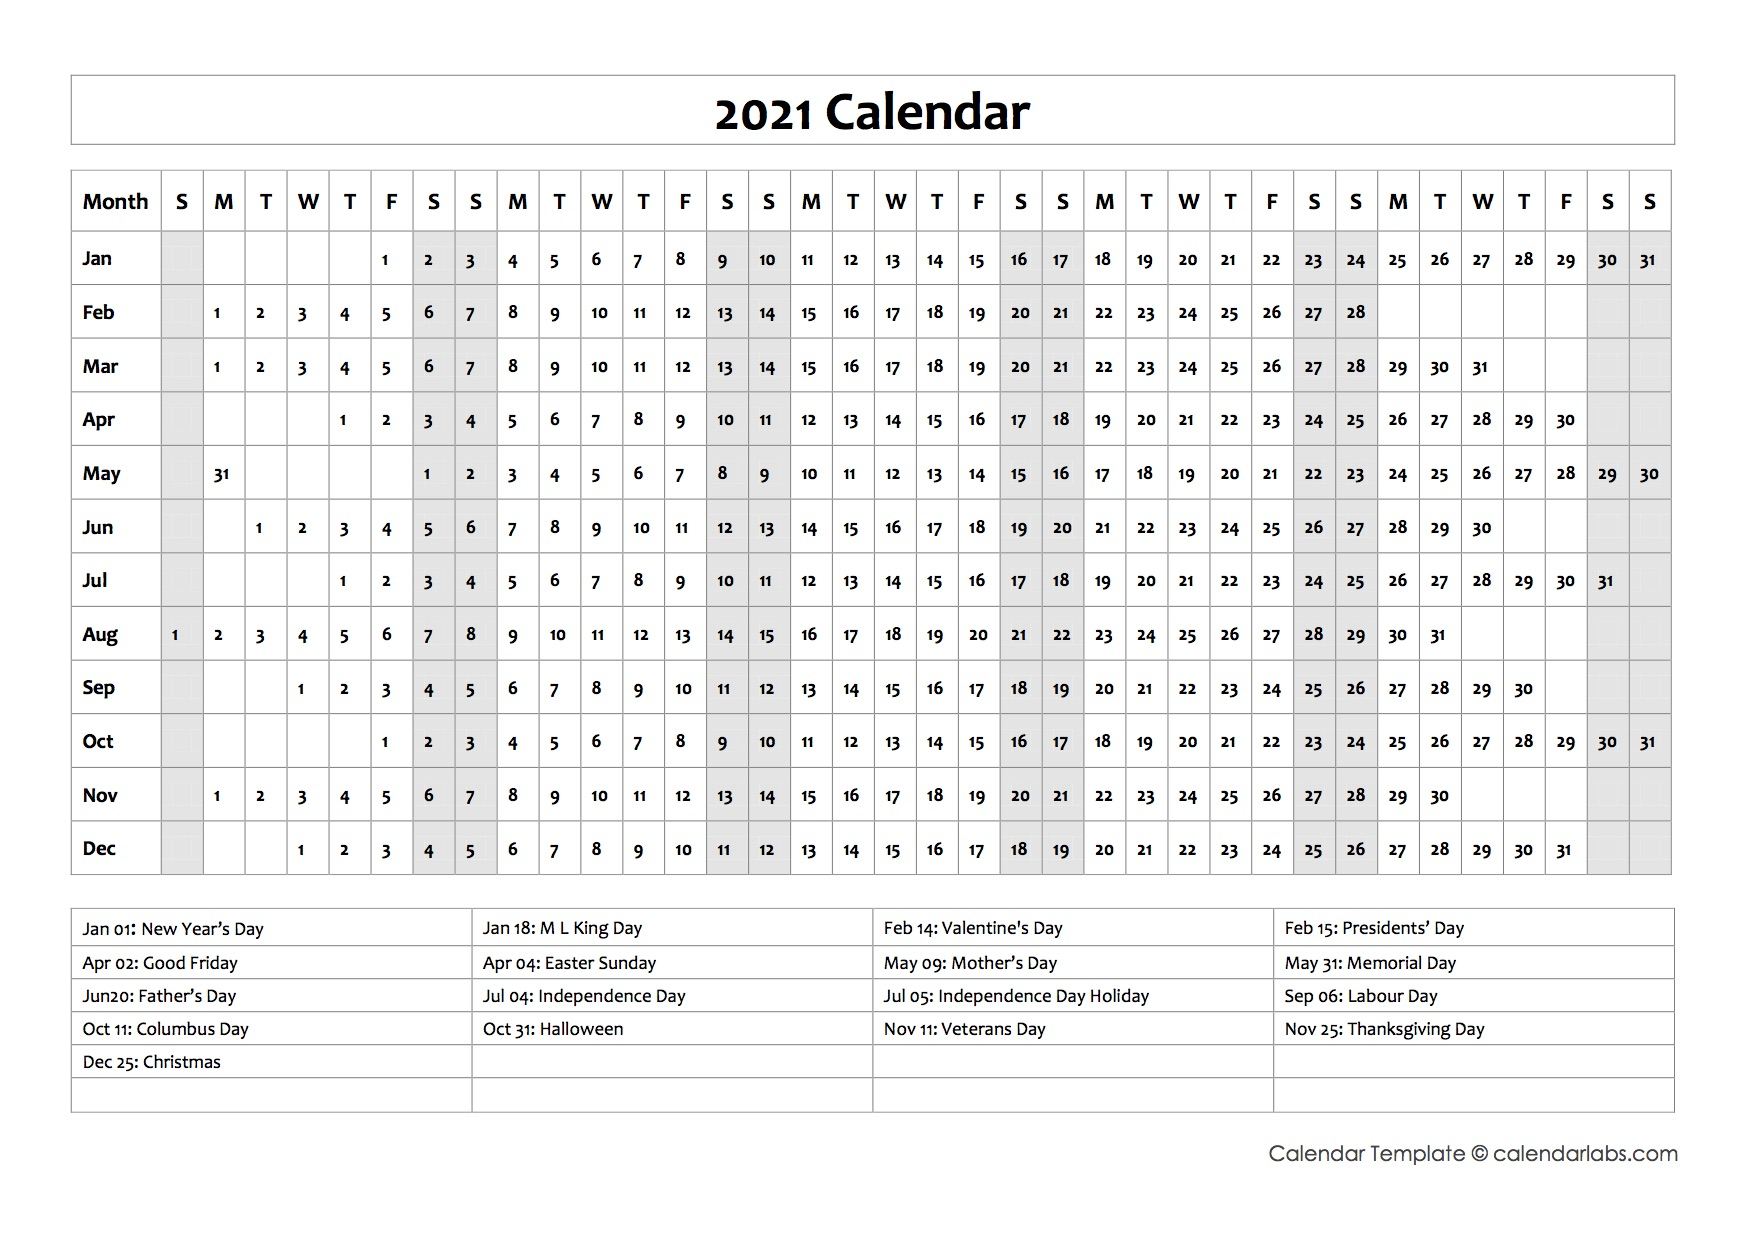 Calendar At A Glance 2021 Printable | Free Letter Templates